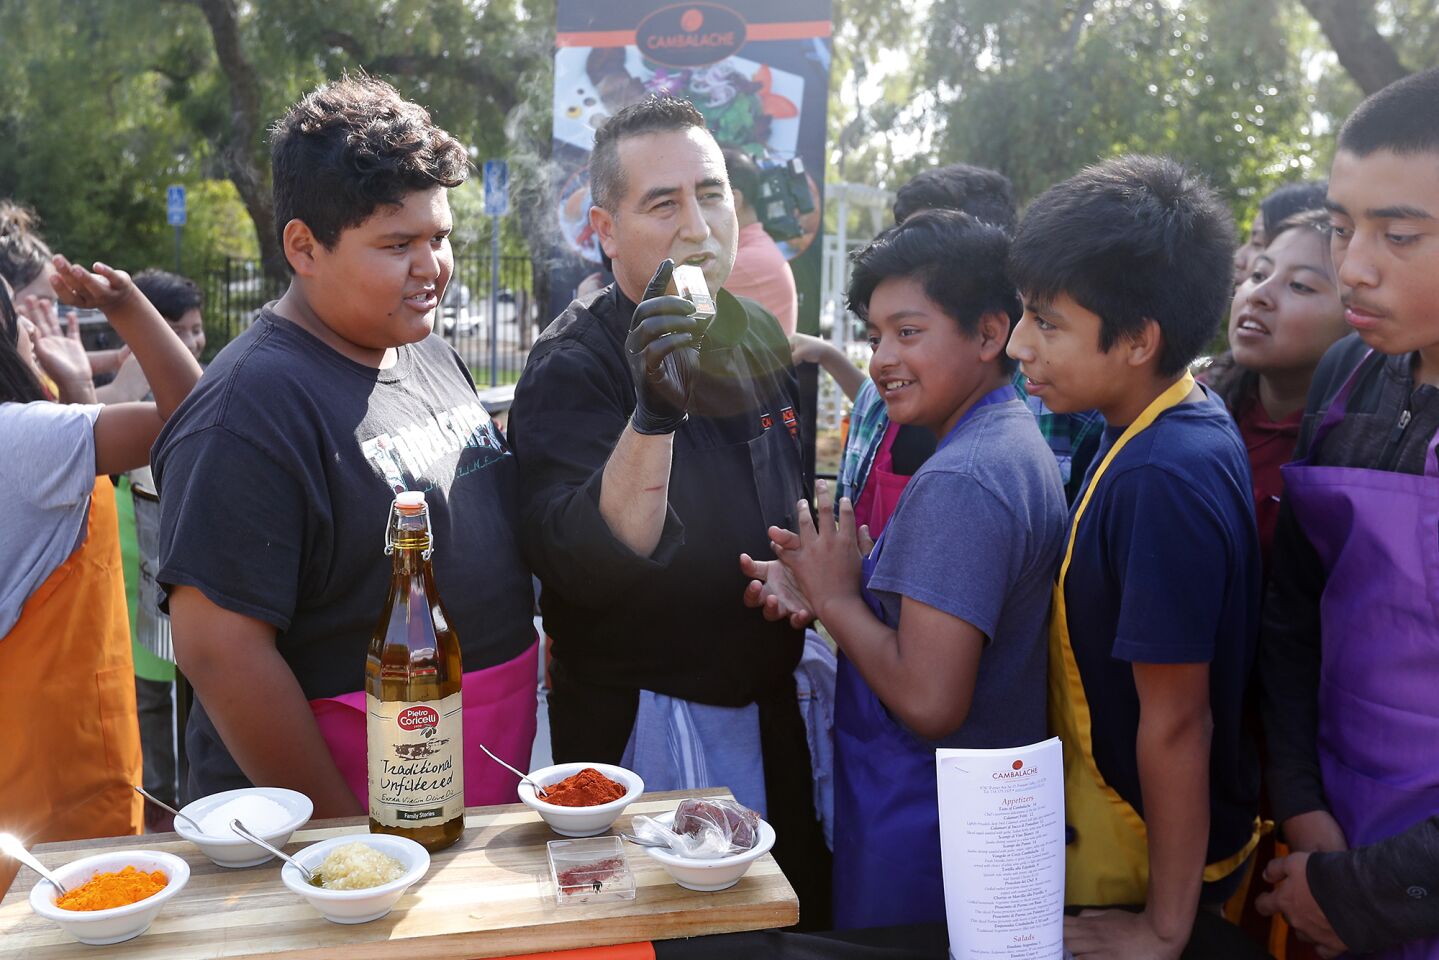 Chef Leo Razo taught about 20 students how to cook paella, a traditional Spanish dish, Wednesday in Huntington Beach.